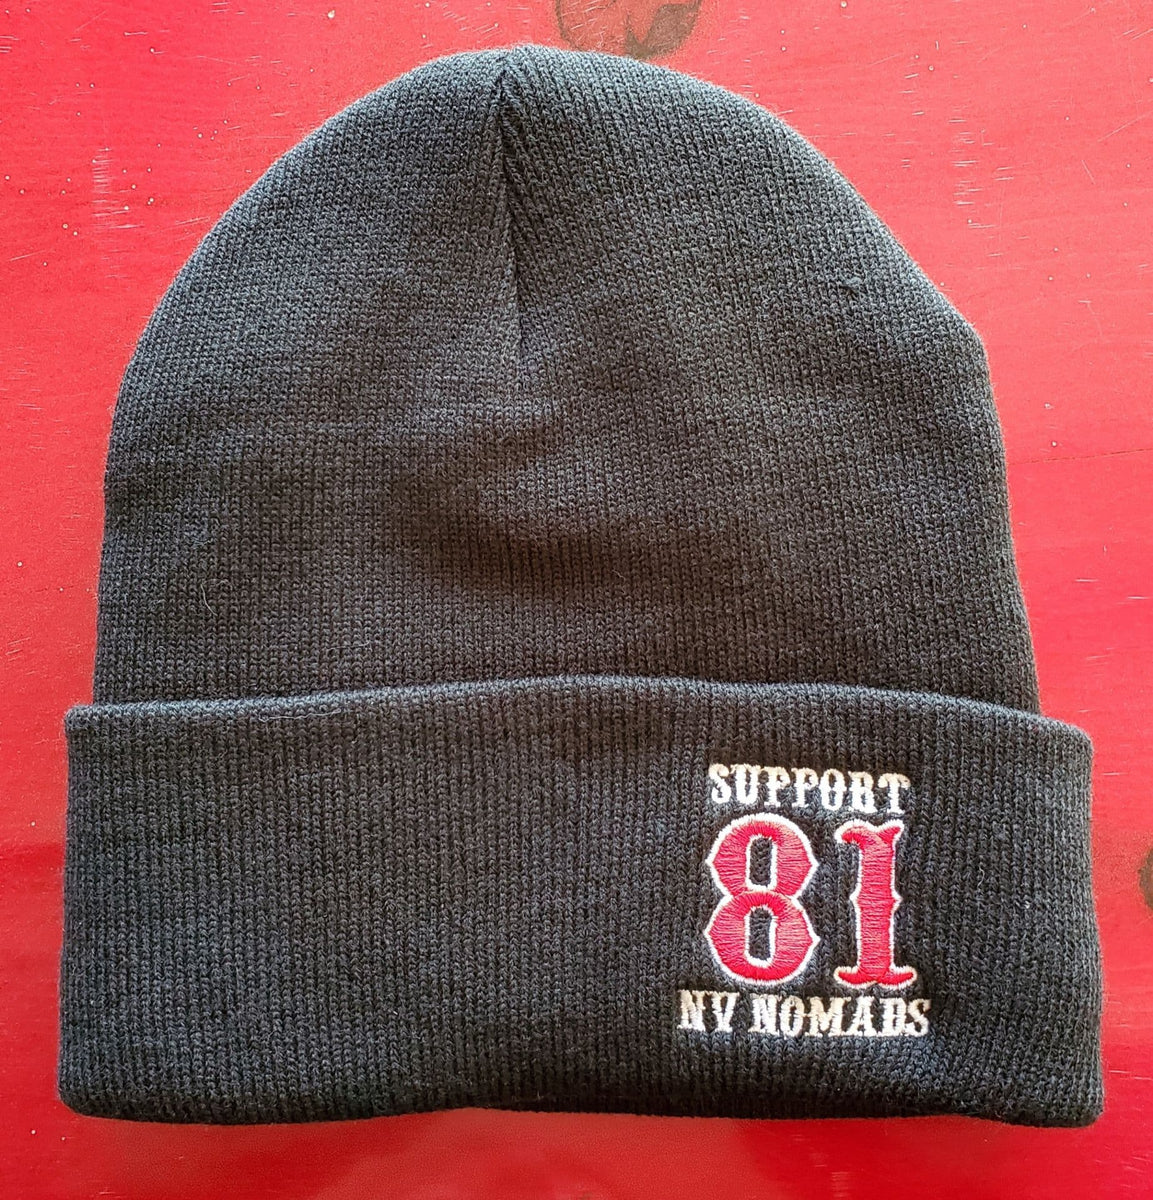 Beanie - 81 Support with – 81 Itch Black Gear Nomads Liner Support Fleece Nevada No Red - w